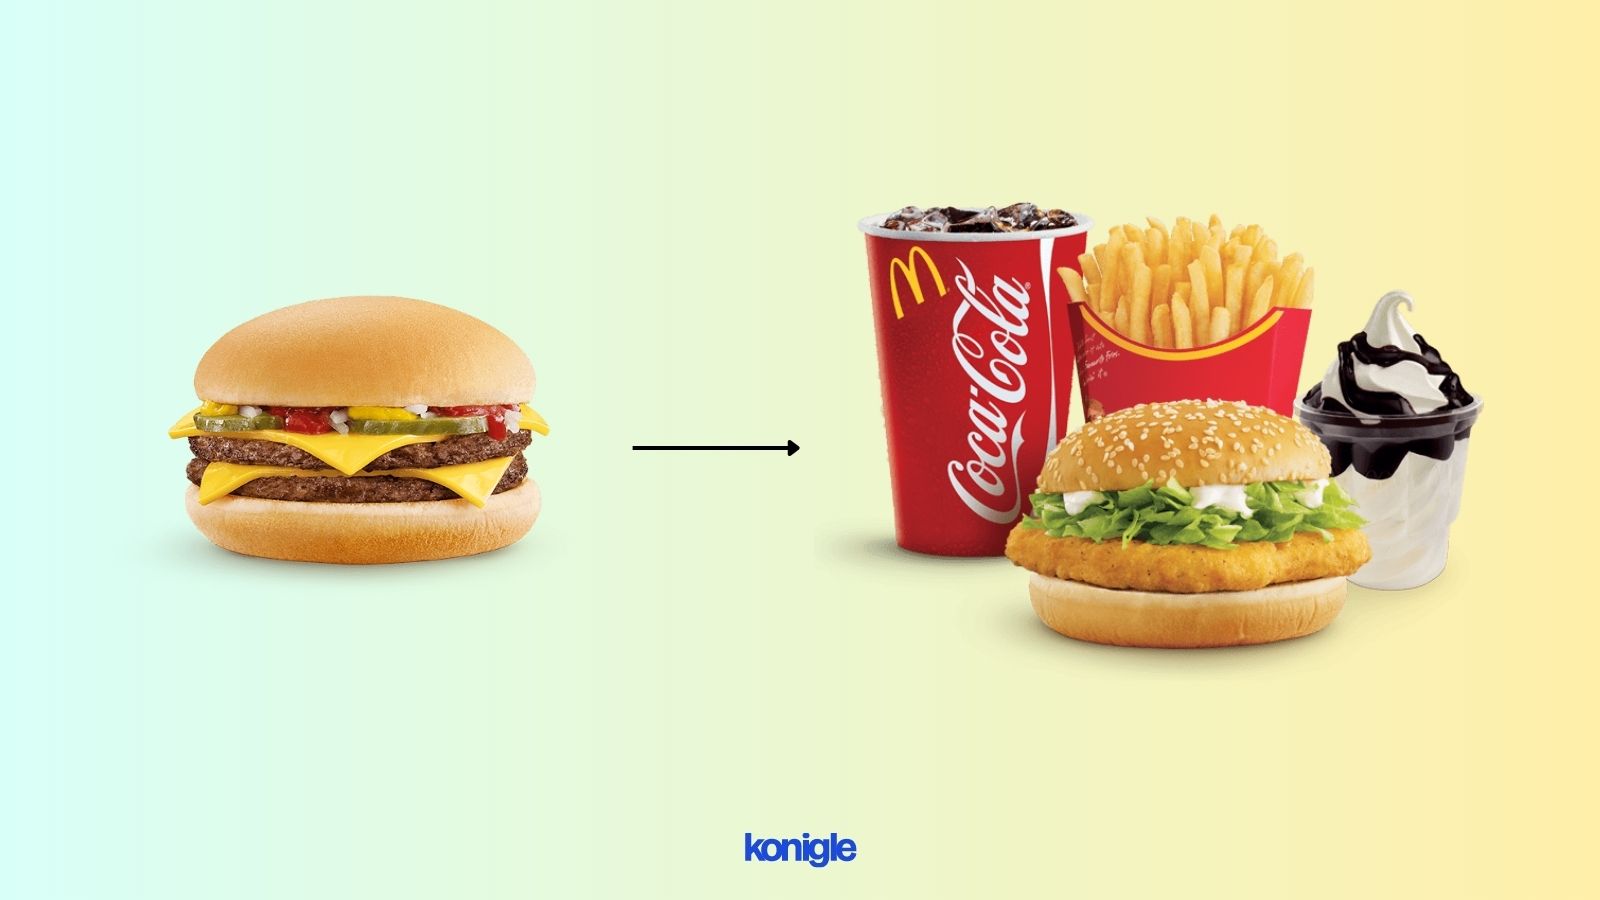 From Hungry to Happy: The McDonald's upselling experience